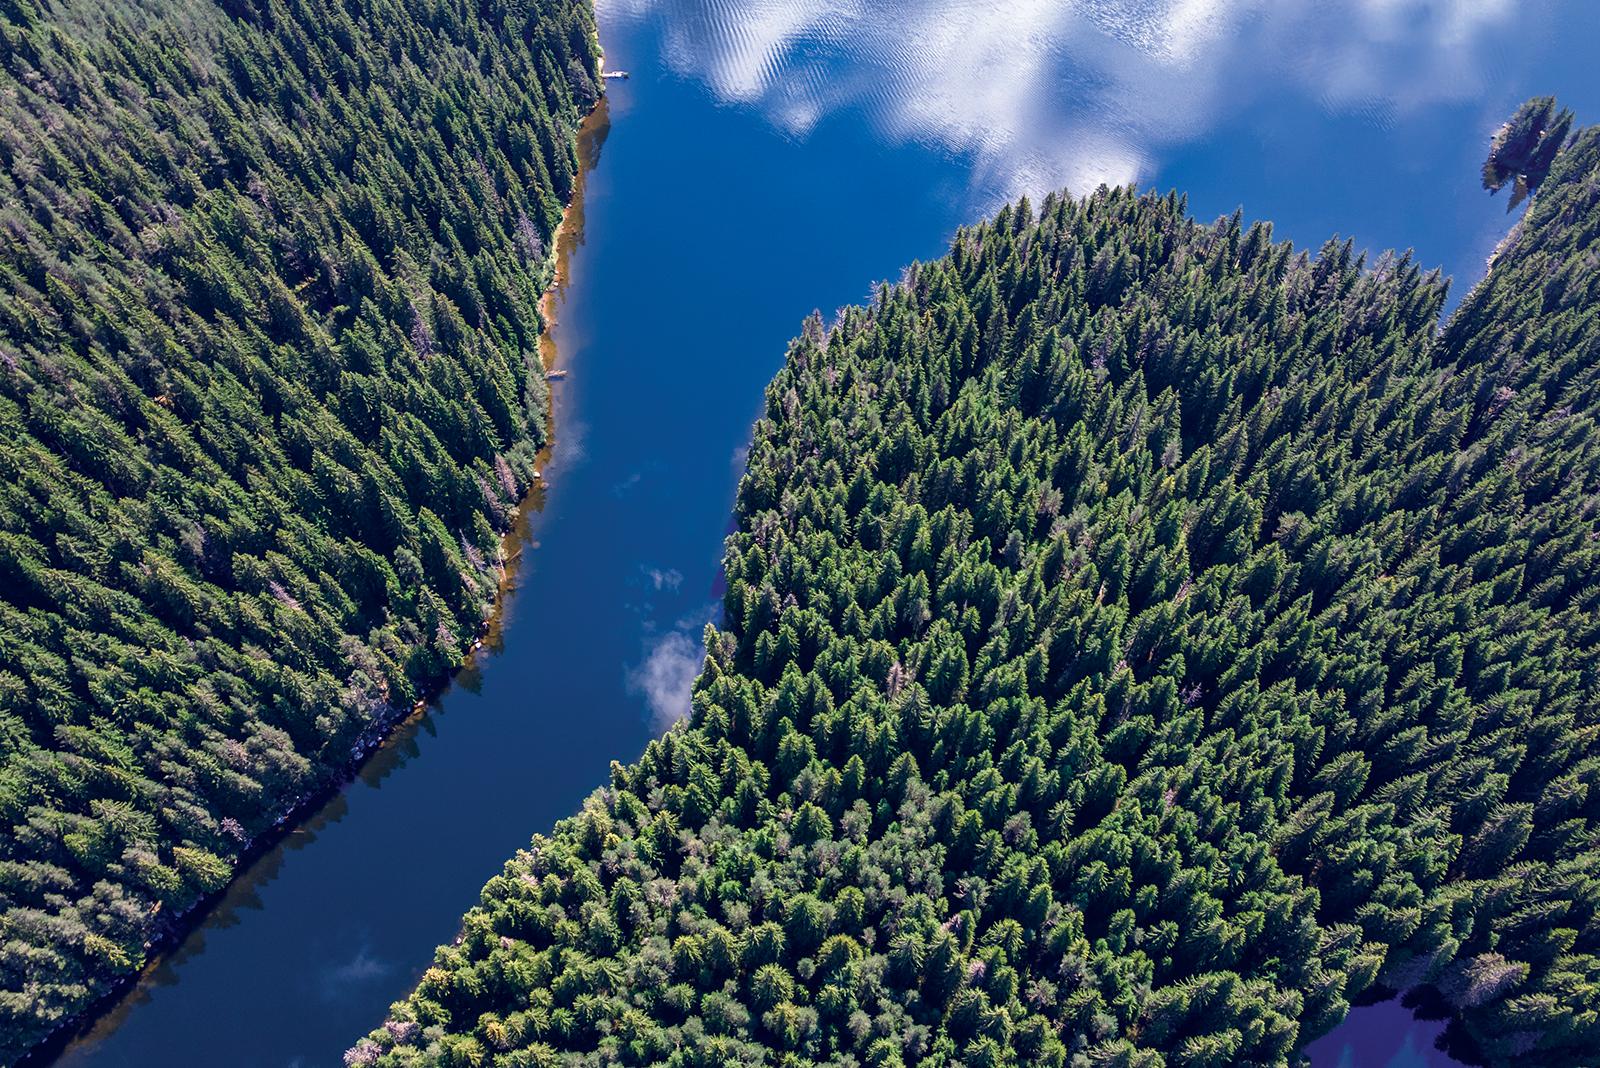 Ariel view of a river surrounded by a thick forest